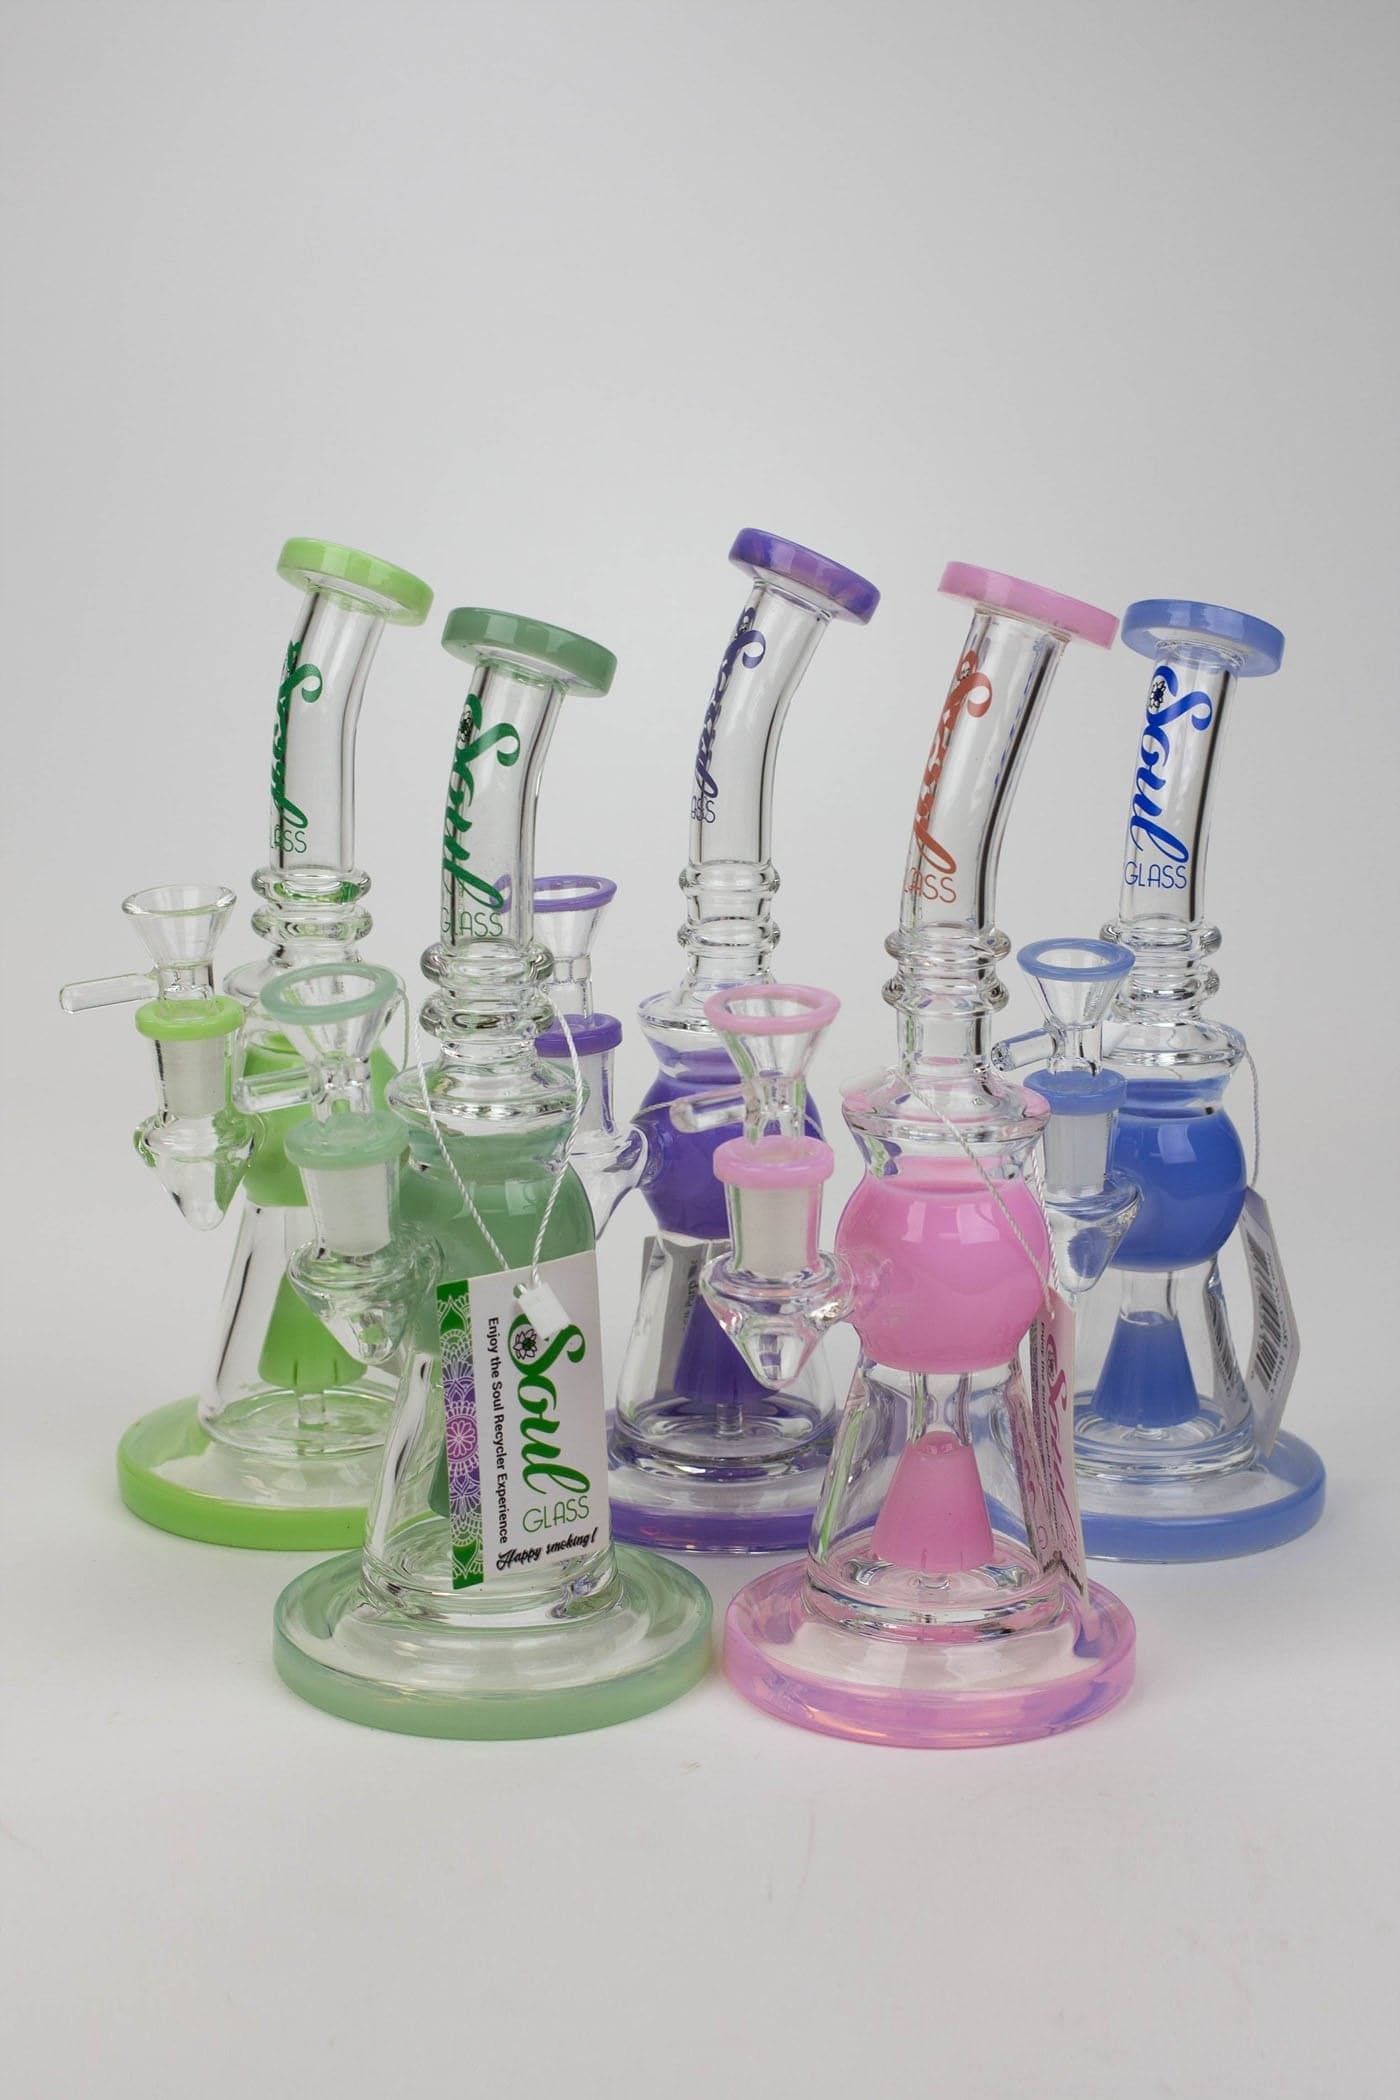 Soul glass 2-in-1 cone diffuser glass water pipes_6